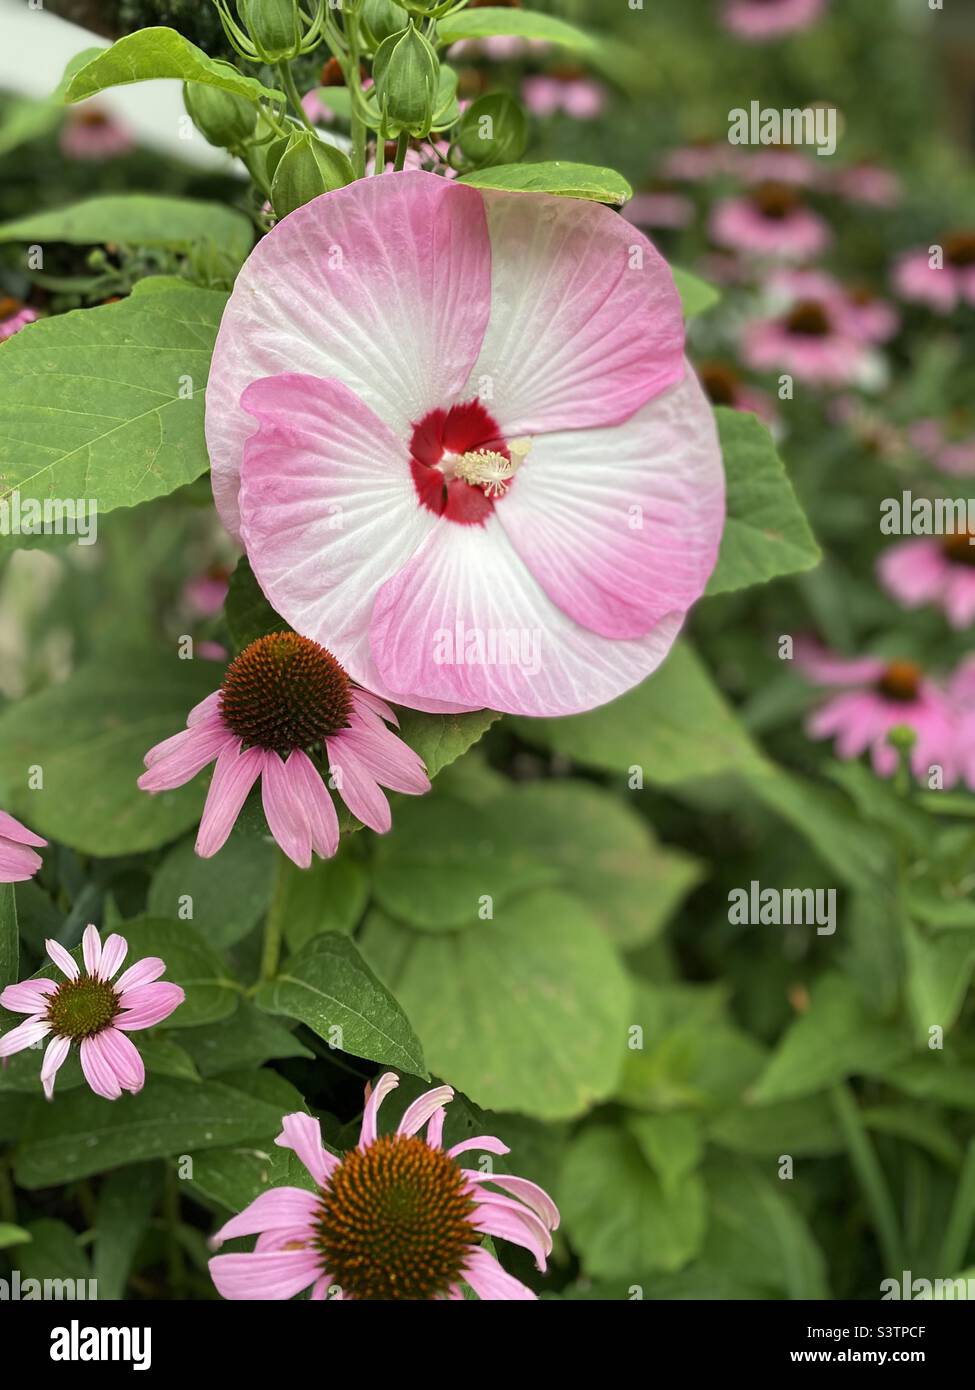 A large bloom of the rose mallow in a garden with purple coneflower. Stock Photo